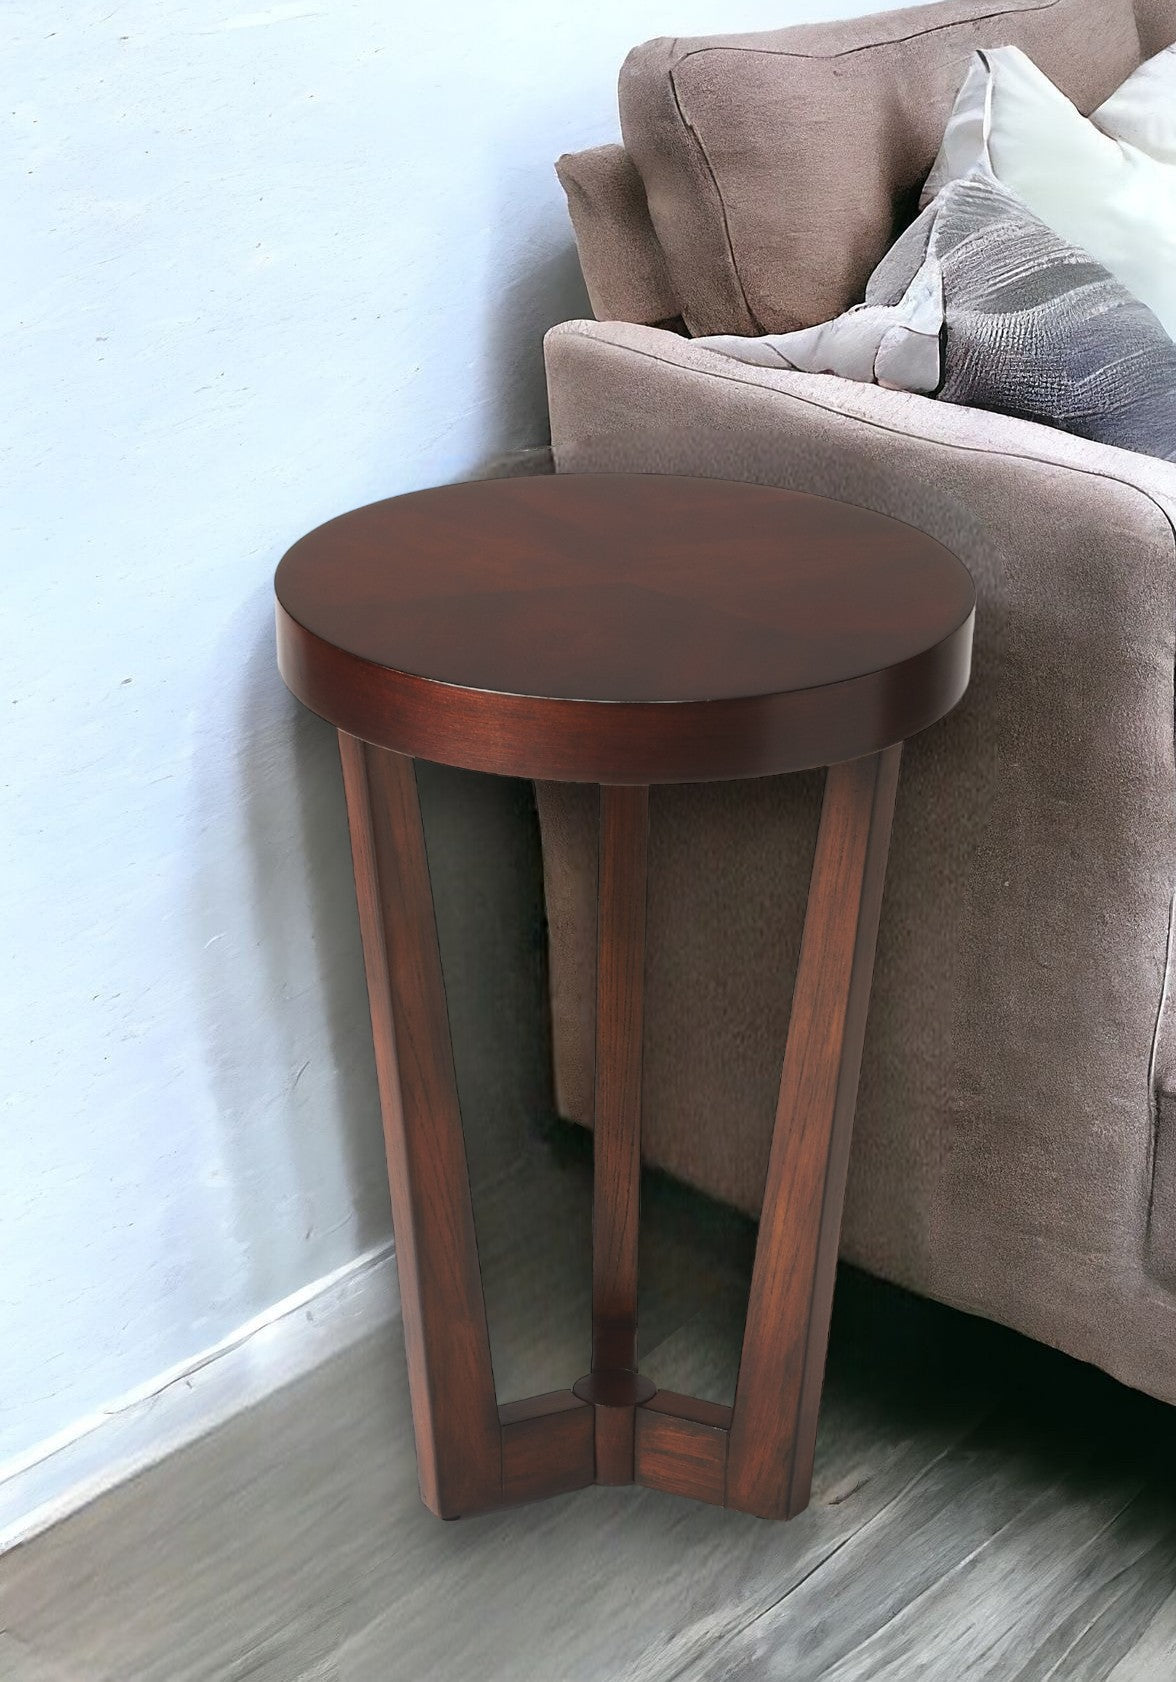 24" Cherry Manufactured Wood Round End Table